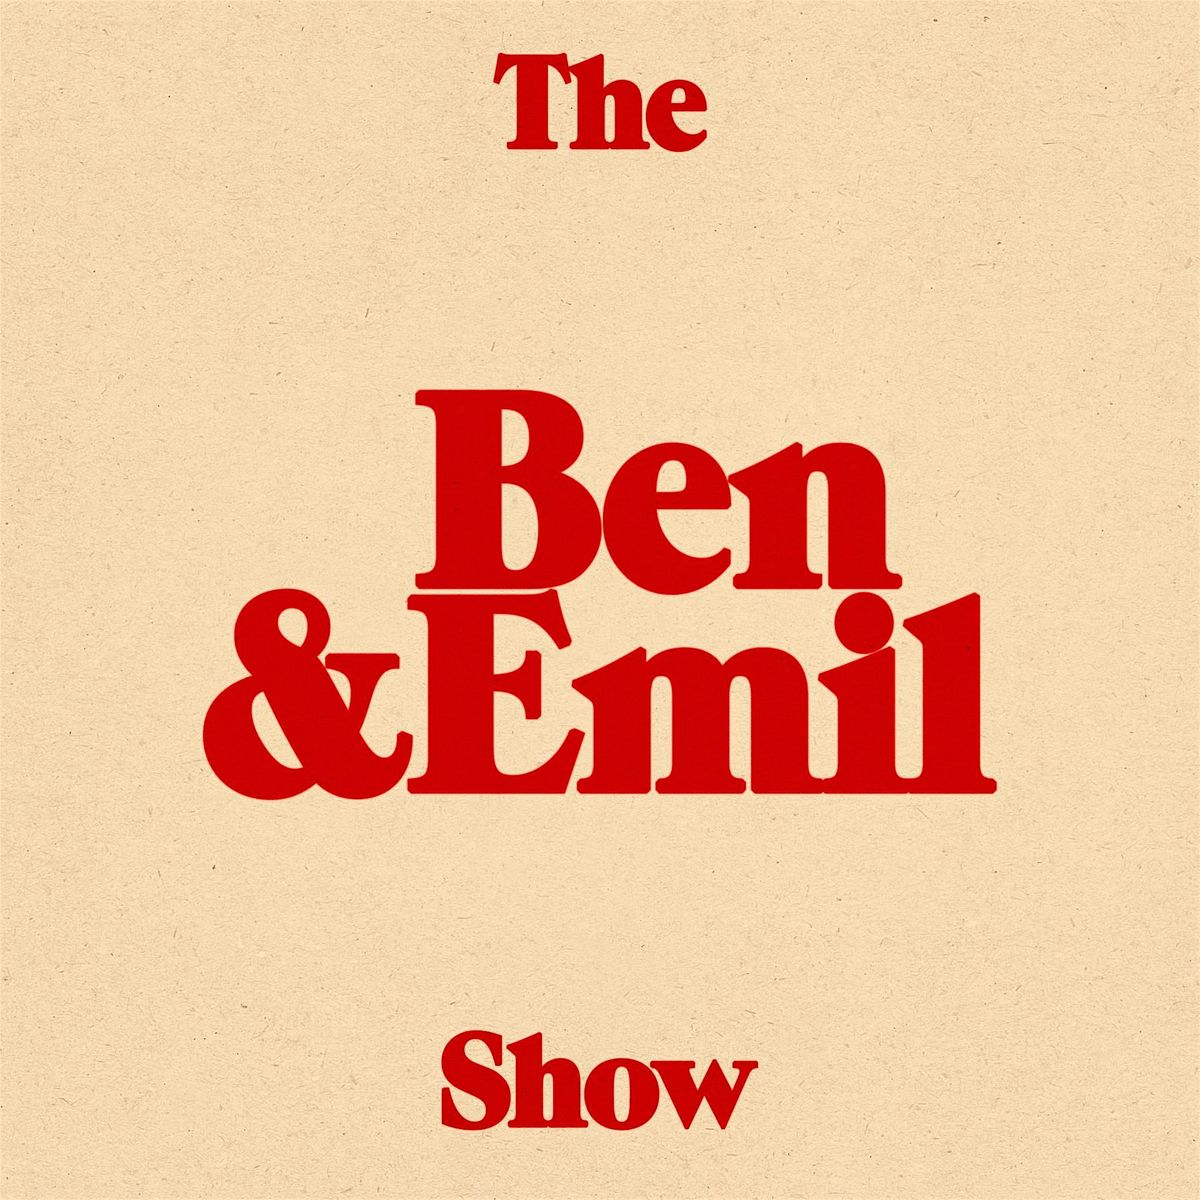 Ben and Emil Live in Brooklyn